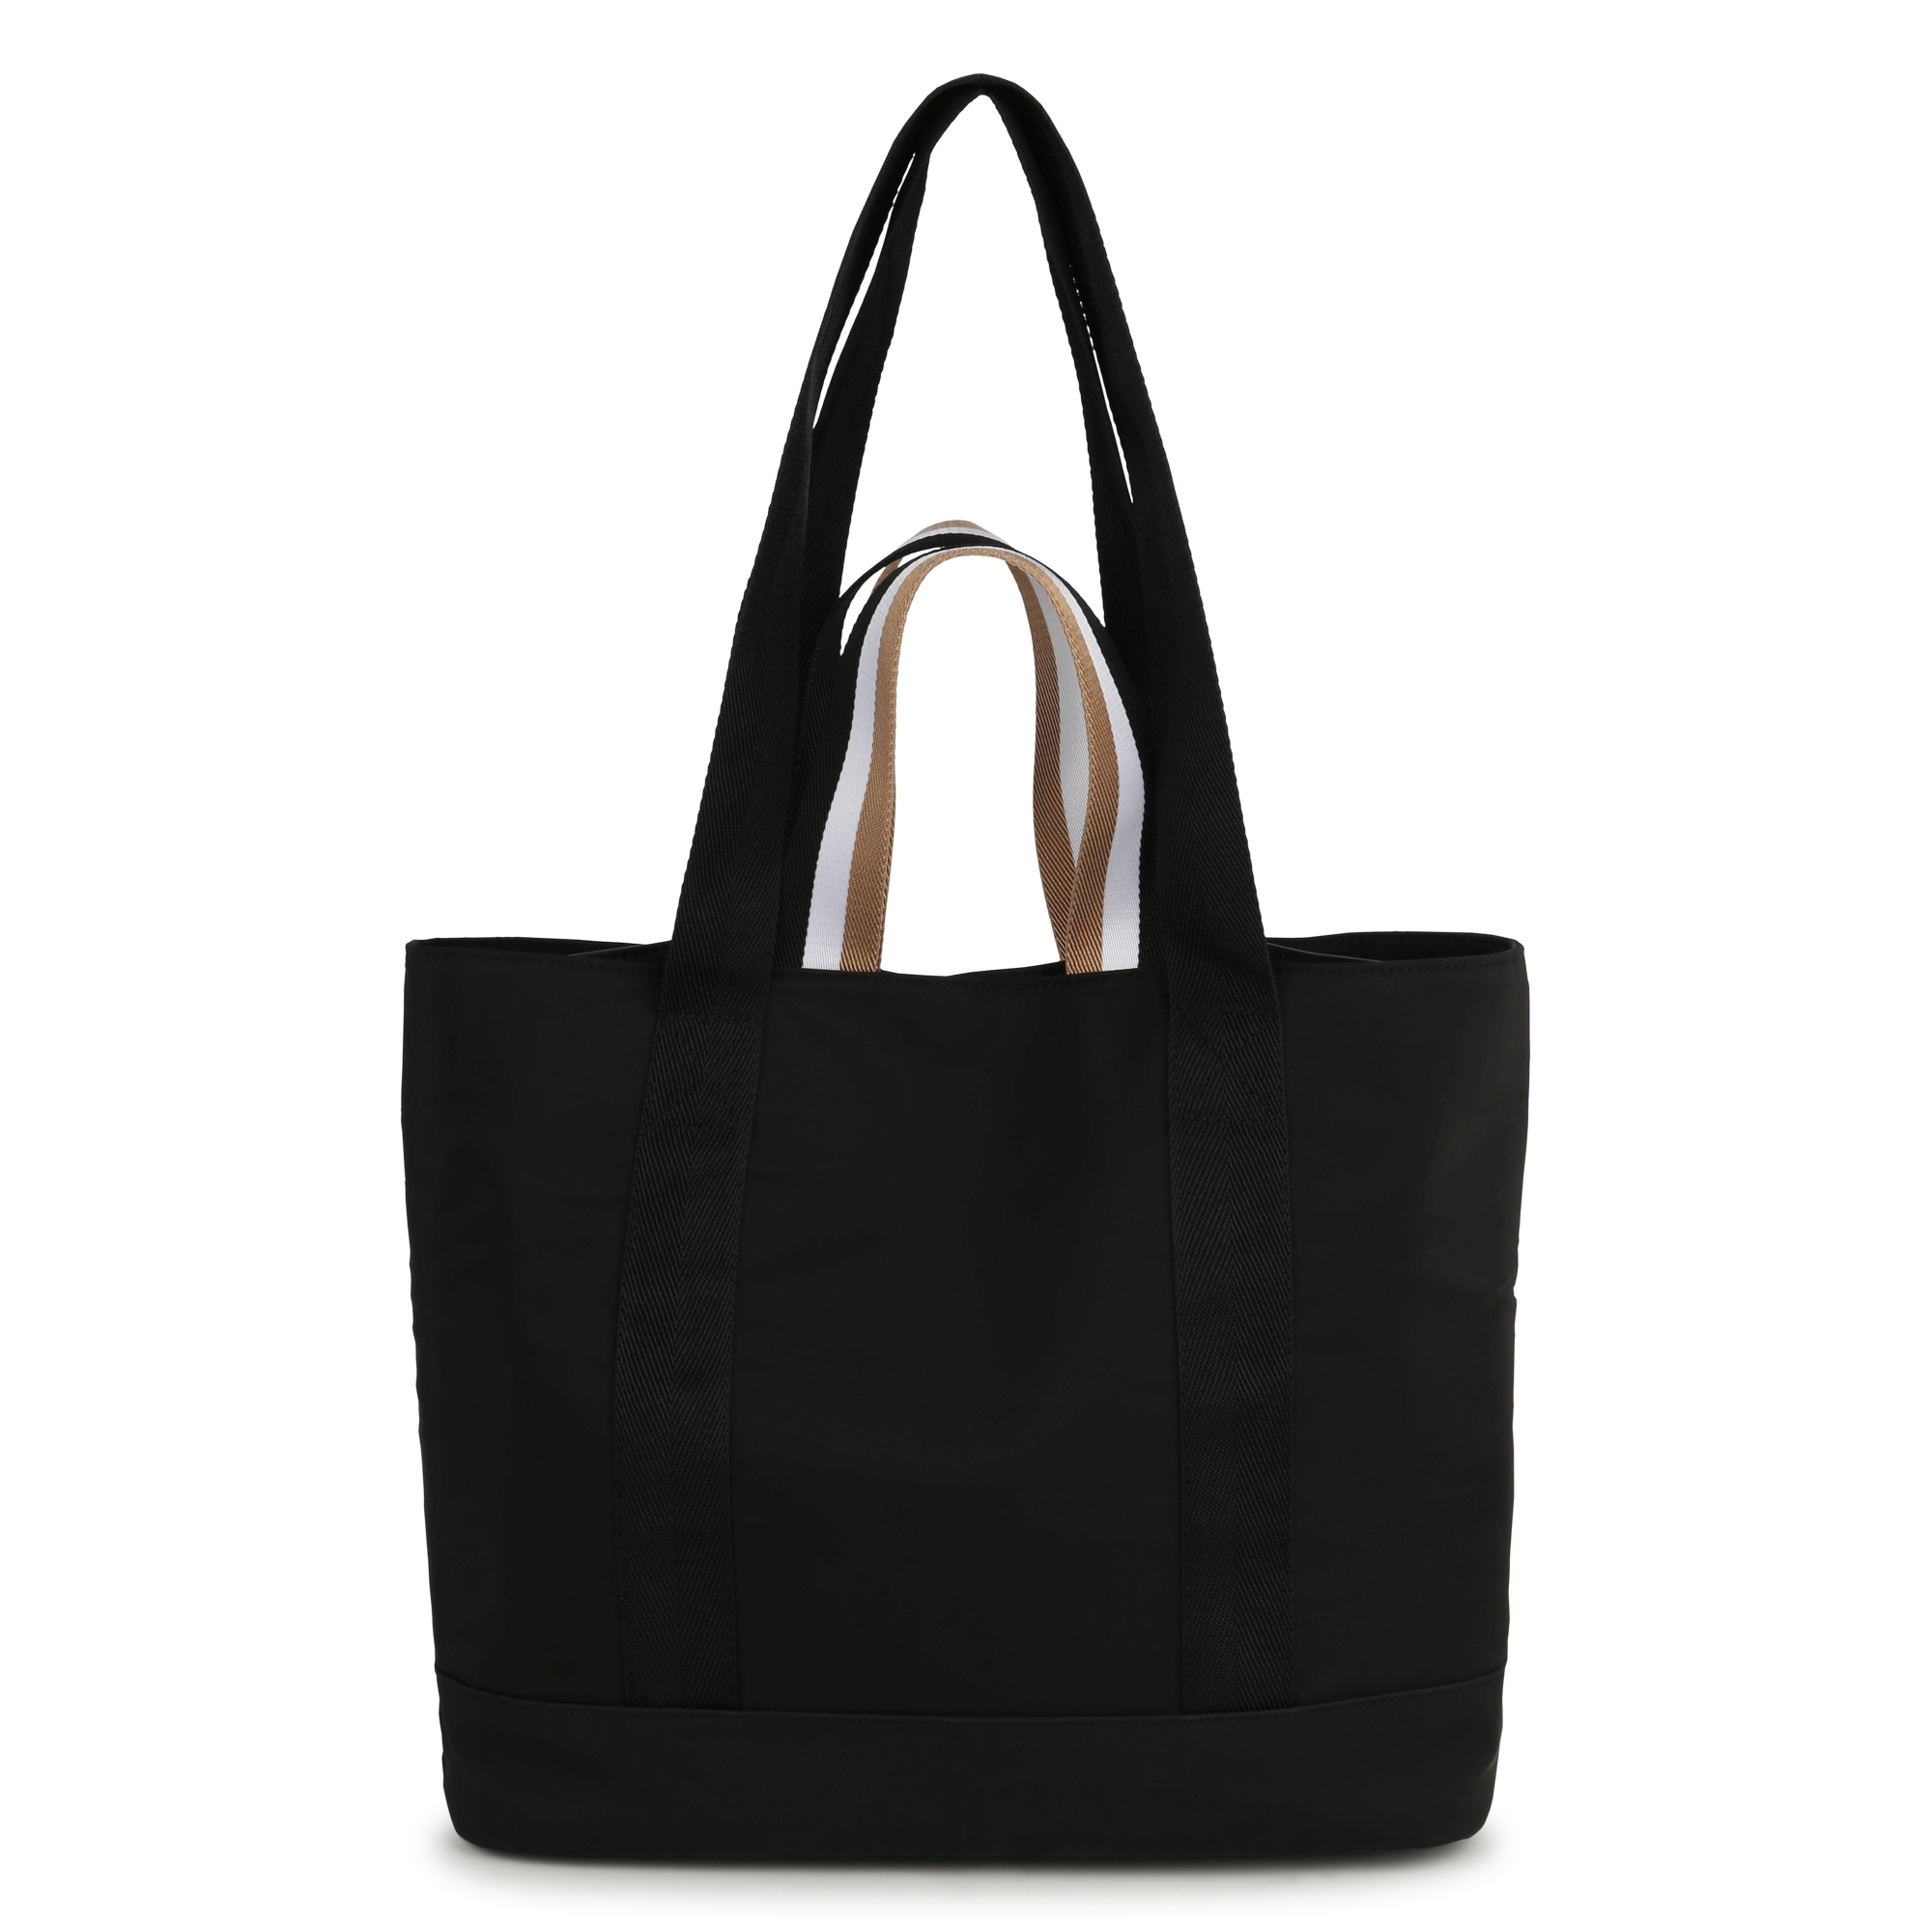 Coated fabric tote bag BOSS for GIRL